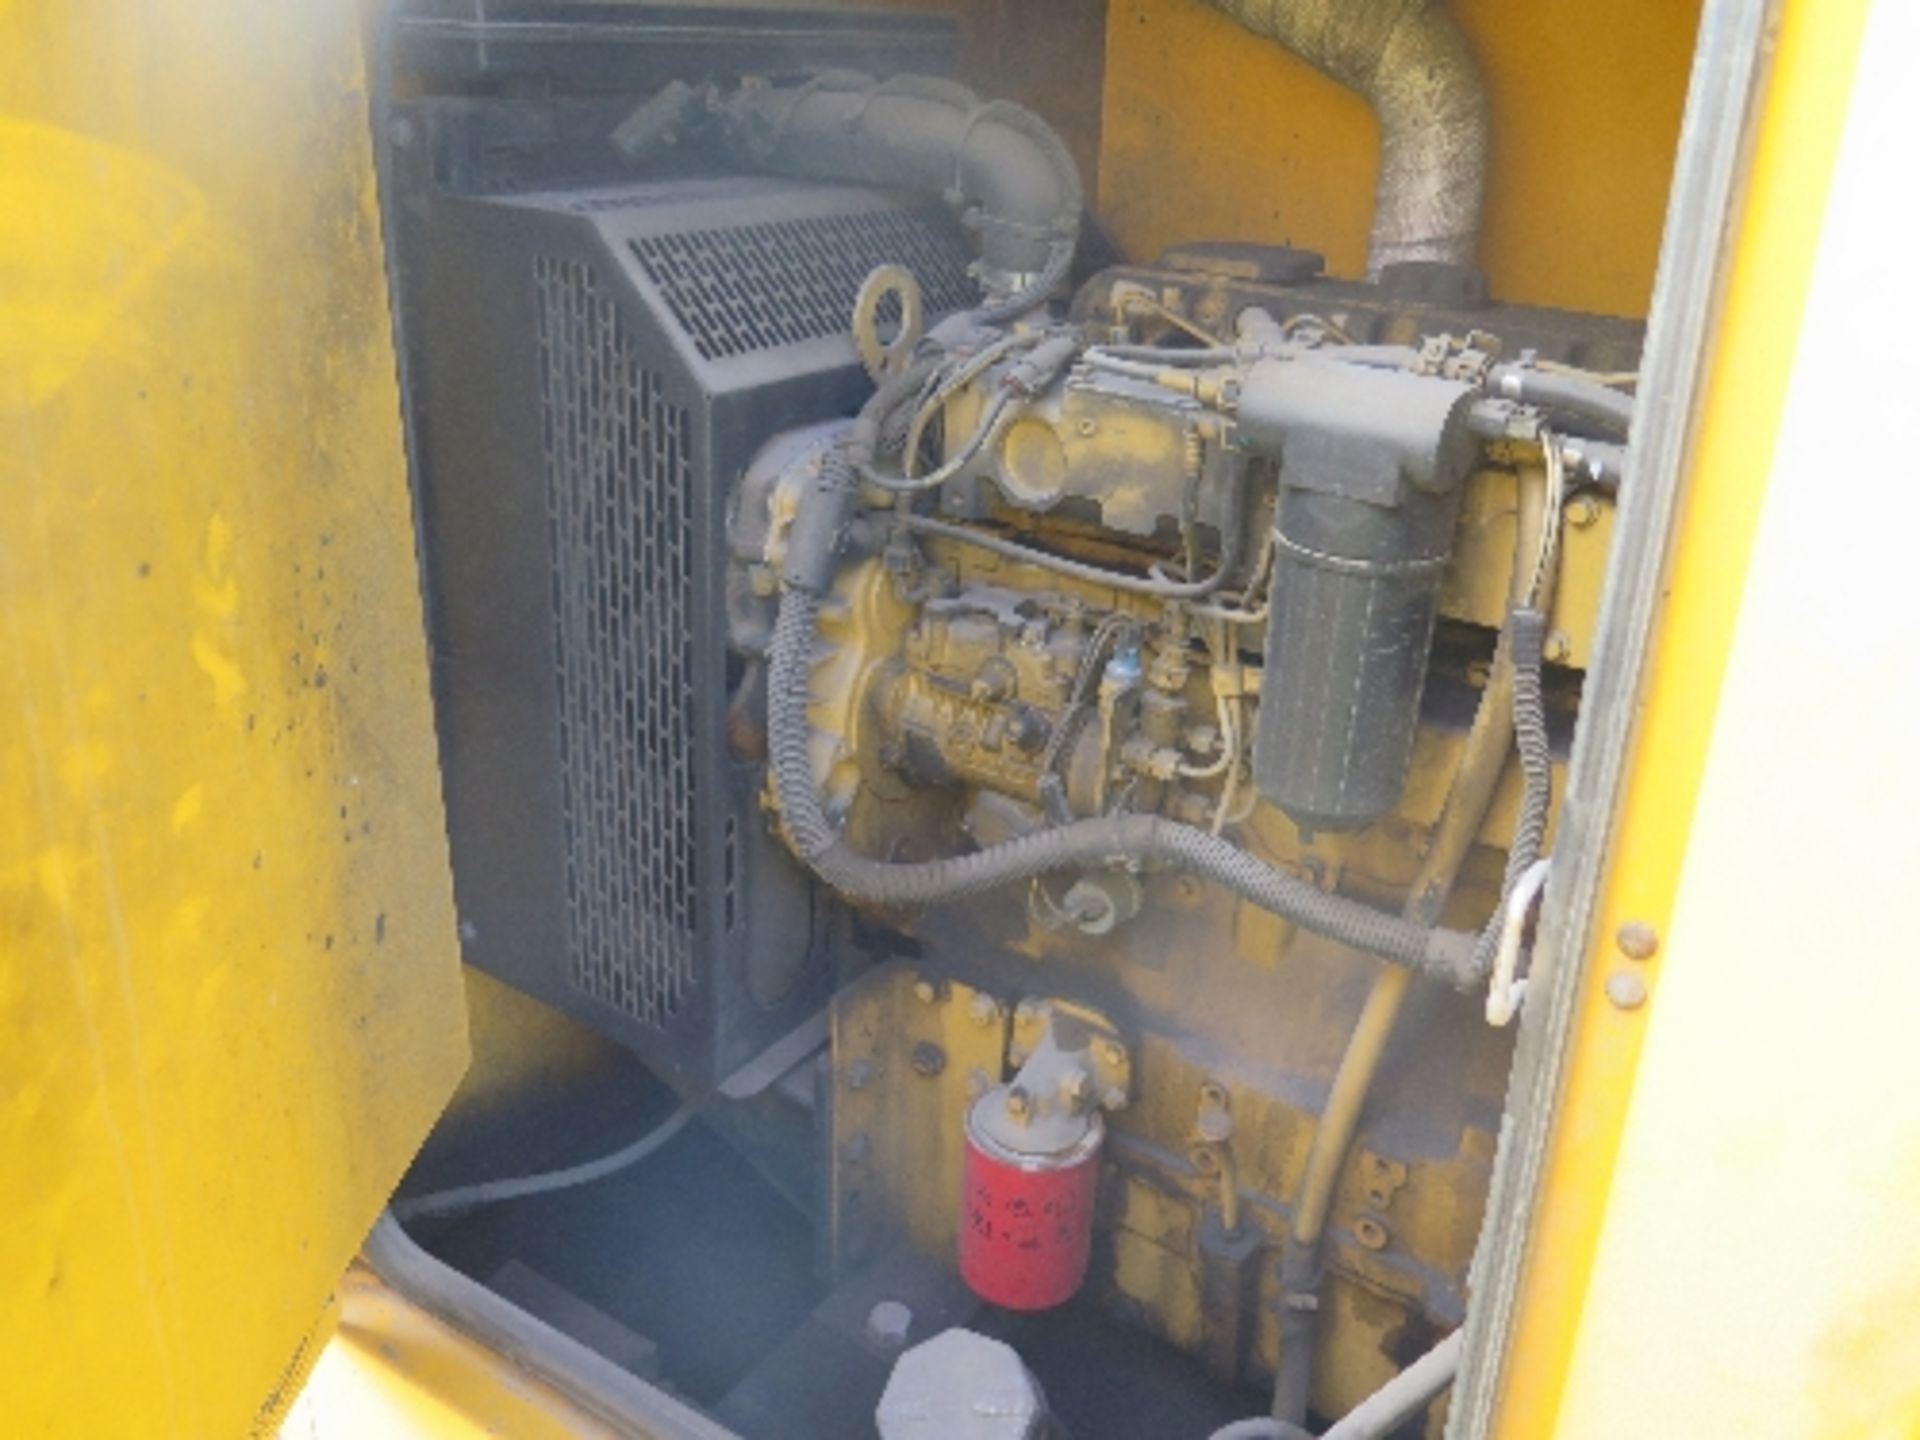 Caterpillar XQE80 generator 24396 hrs 157818
PERKINS - STARTS AND RUNS BUT ENGINE KNOCK
ALL LOTS - Image 3 of 5